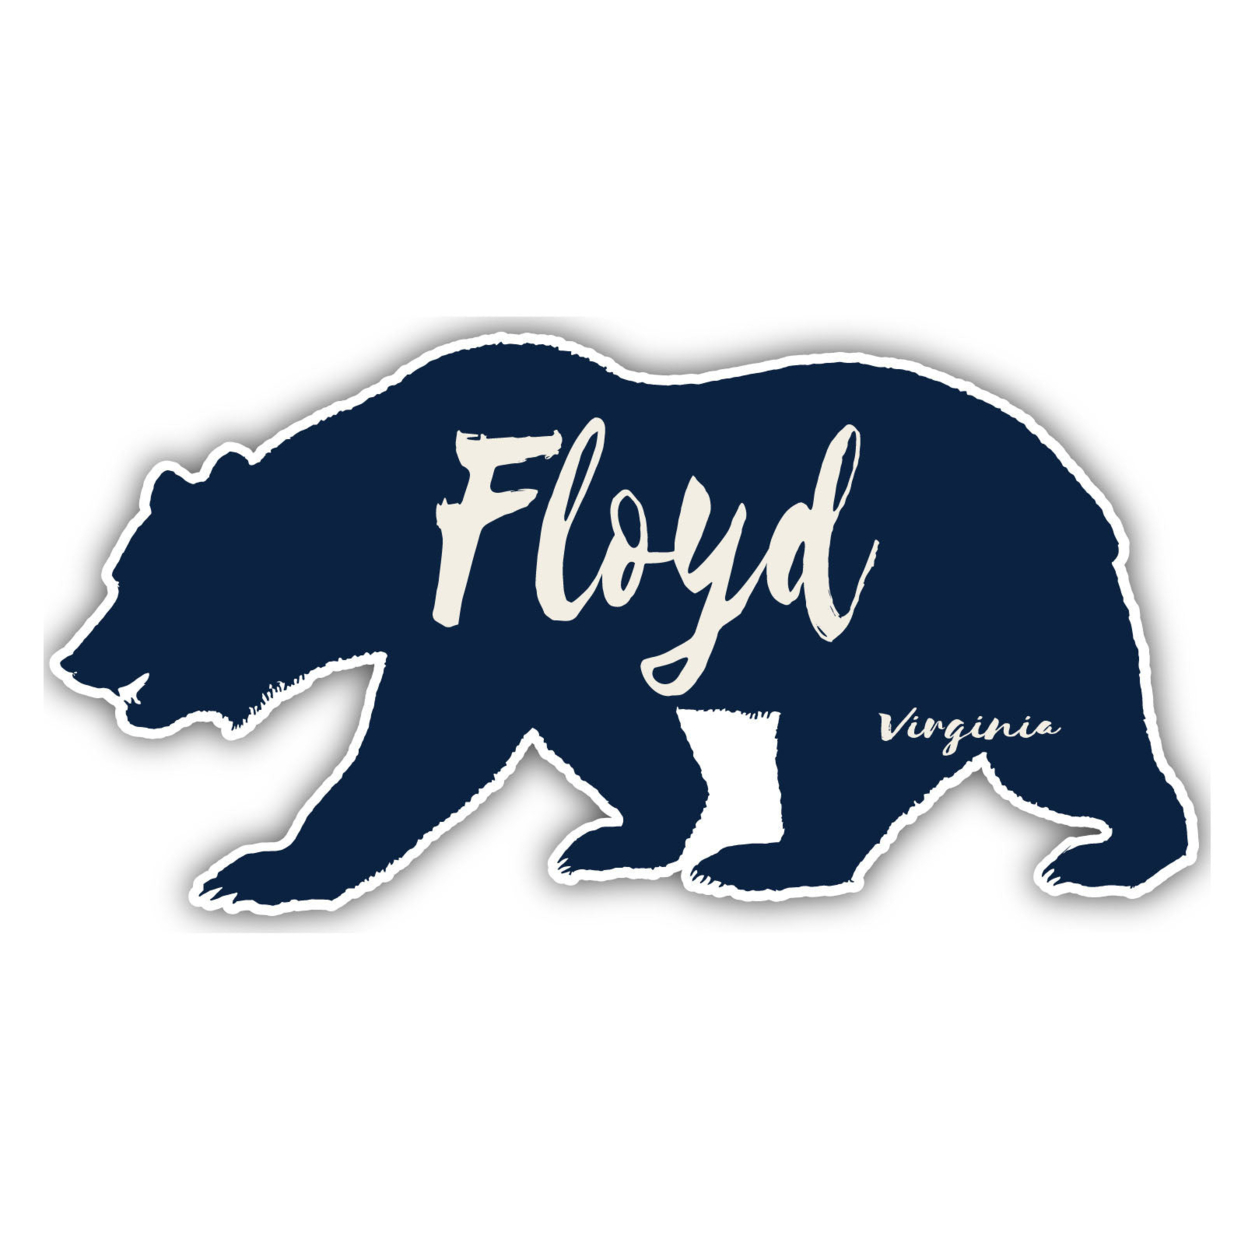 Floyd Virginia Souvenir Decorative Stickers (Choose Theme And Size) - 4-Pack, 4-Inch, Bear